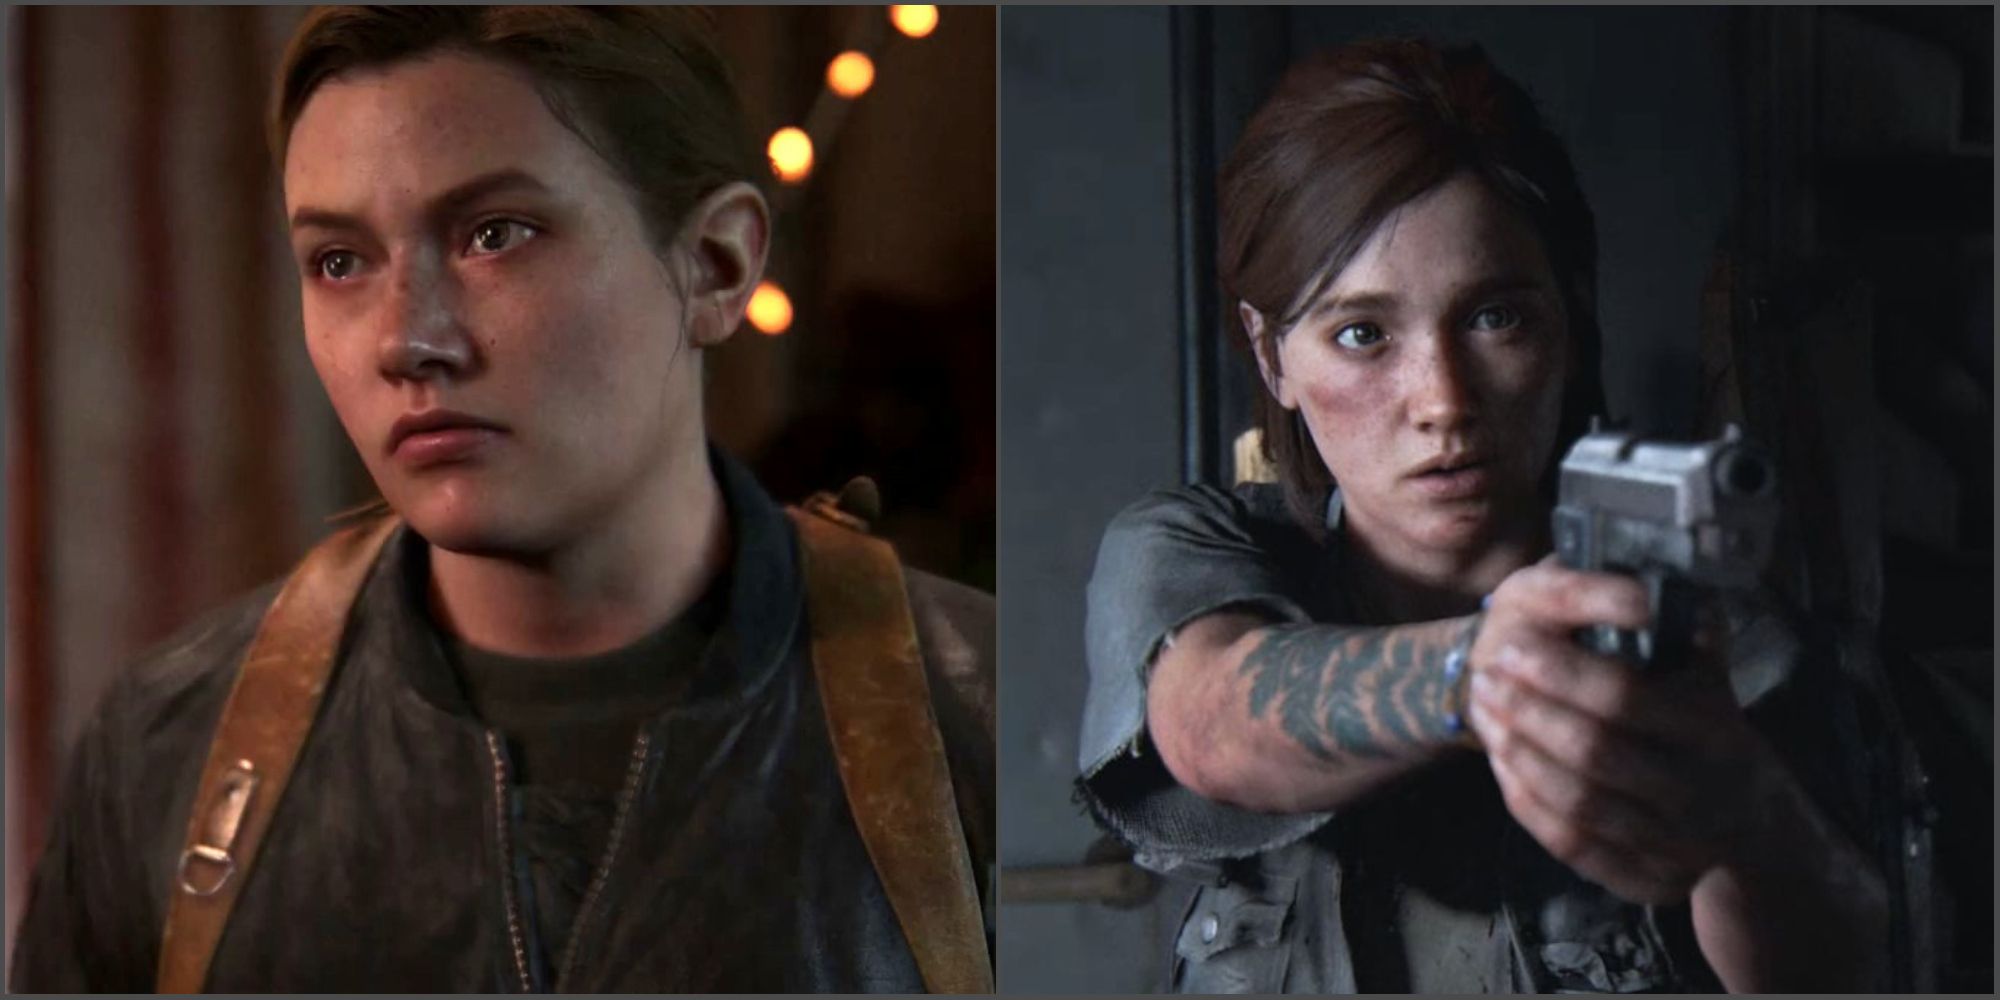 10 Things From Part II The Last Of Us Shouldn't Adapt